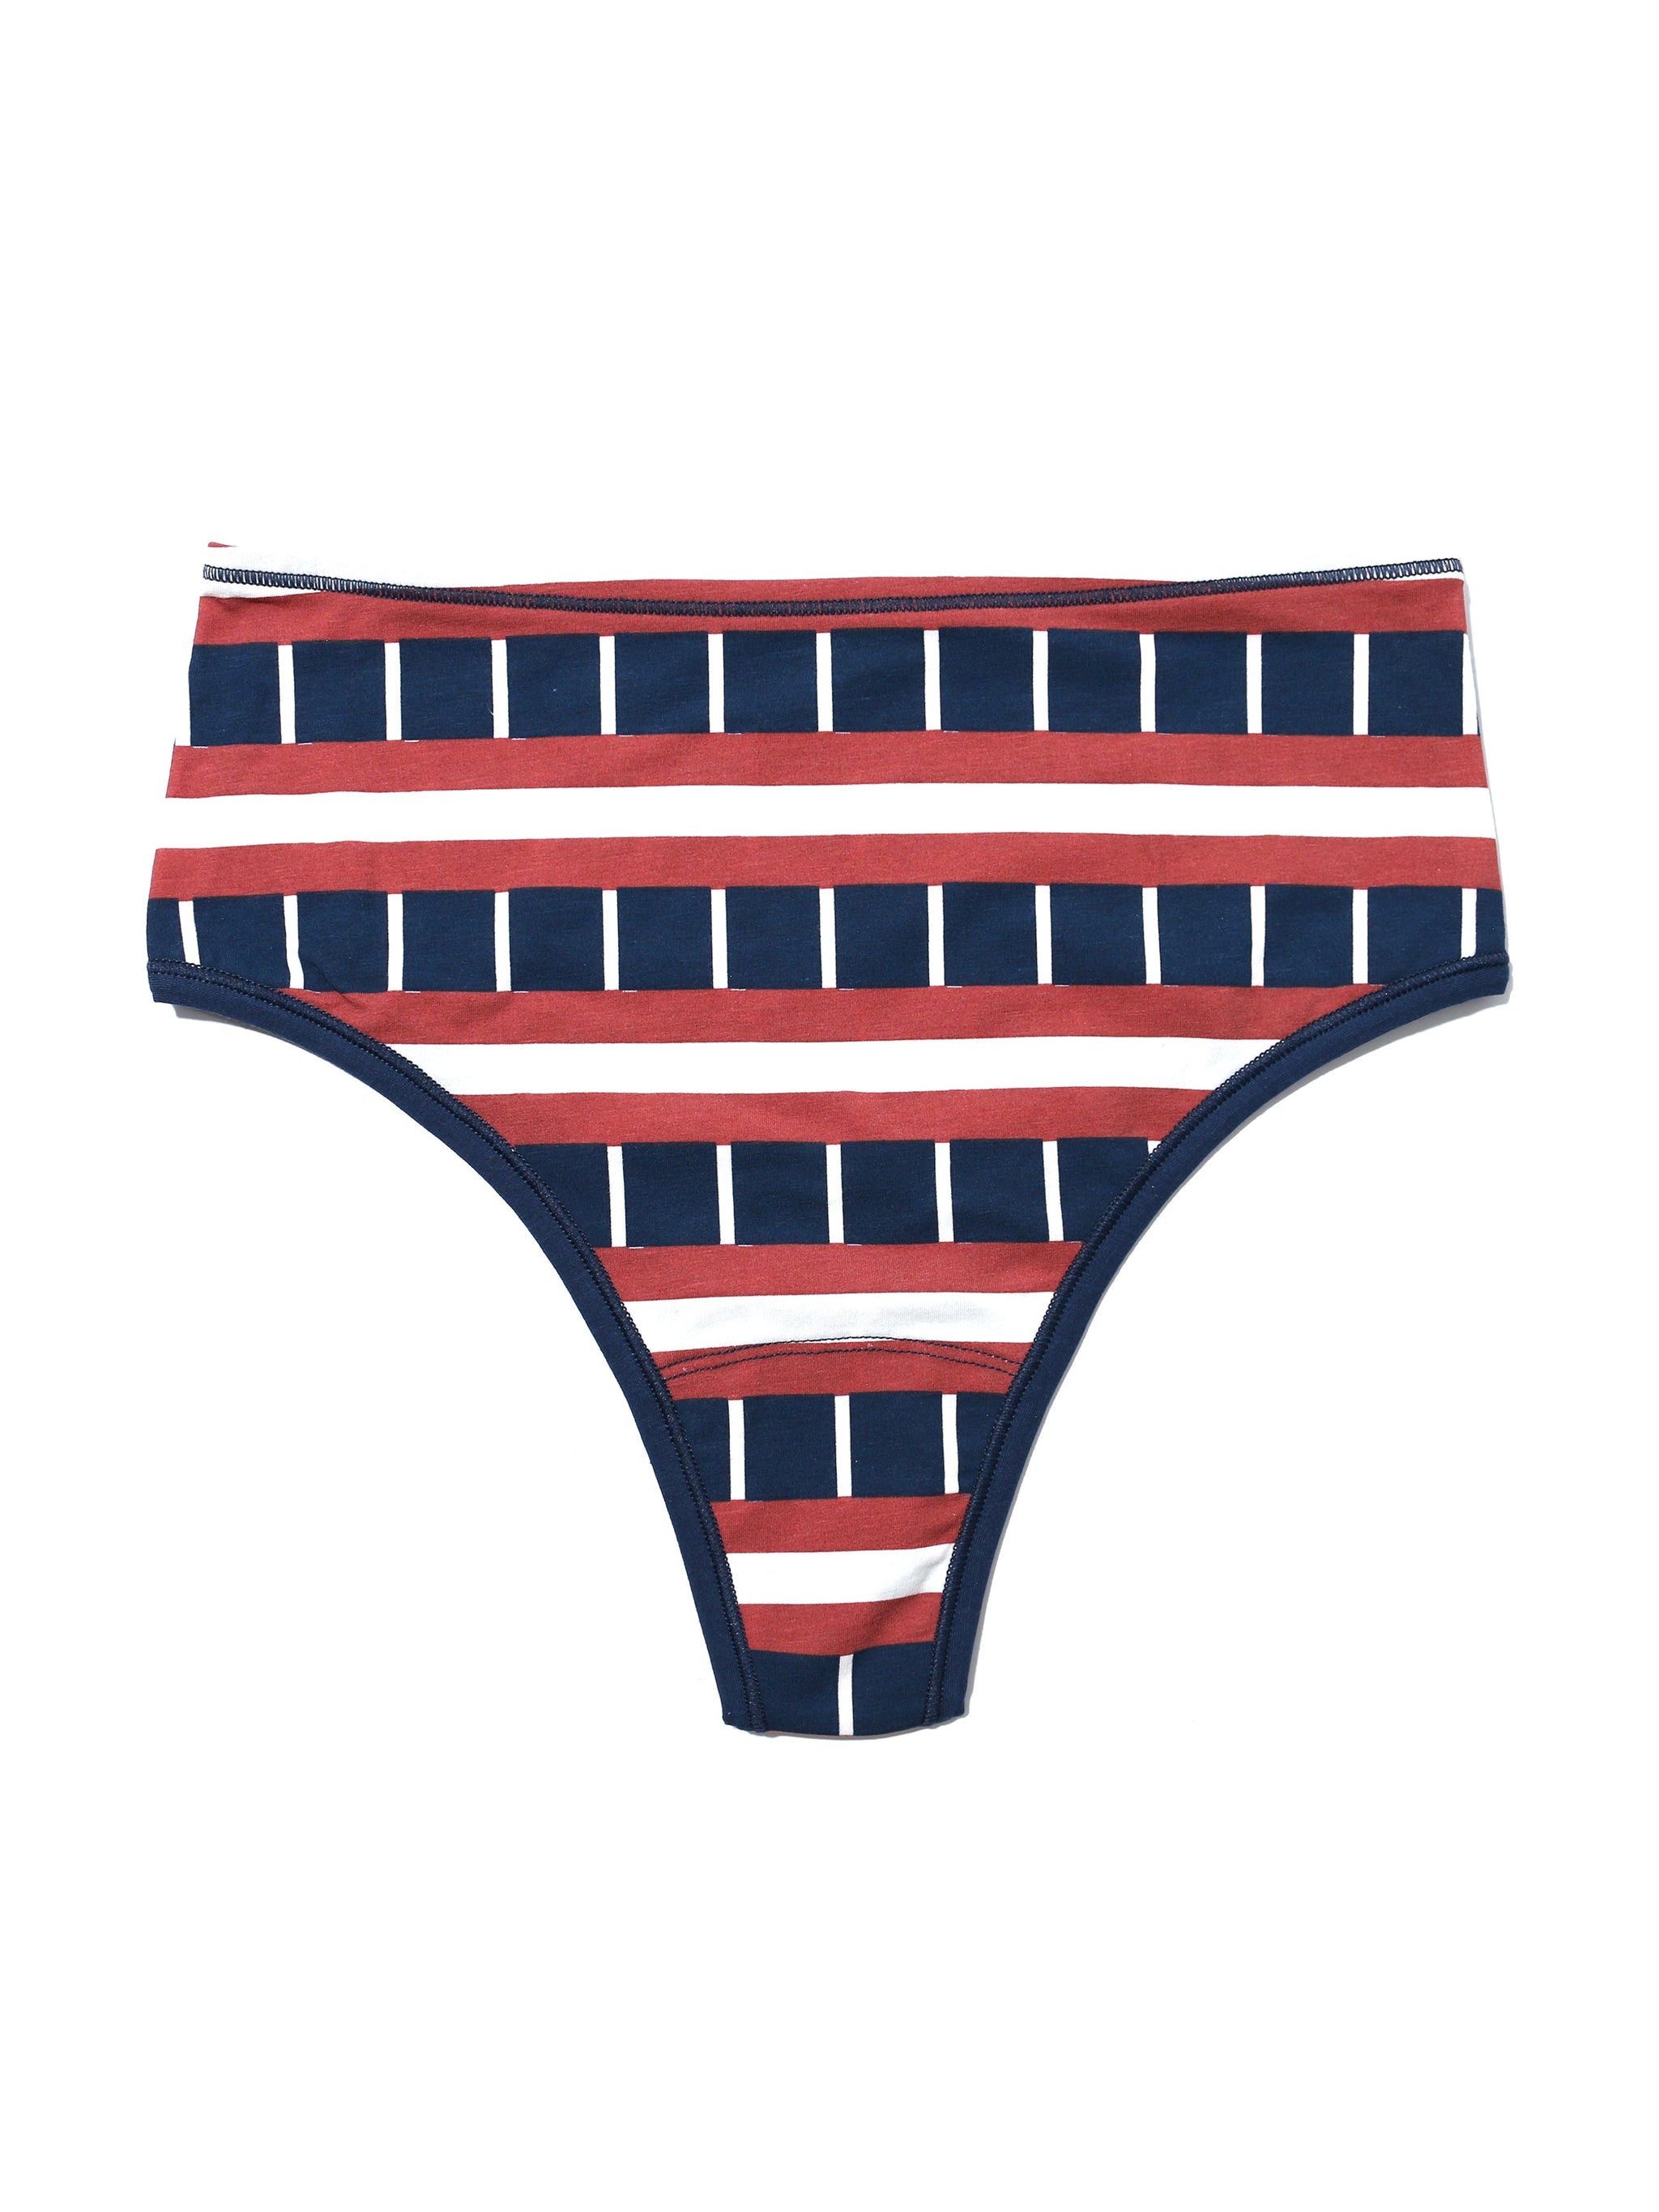 Red White and Blue Rare Hanes Briefs Collection Mystery Pair -  Canada